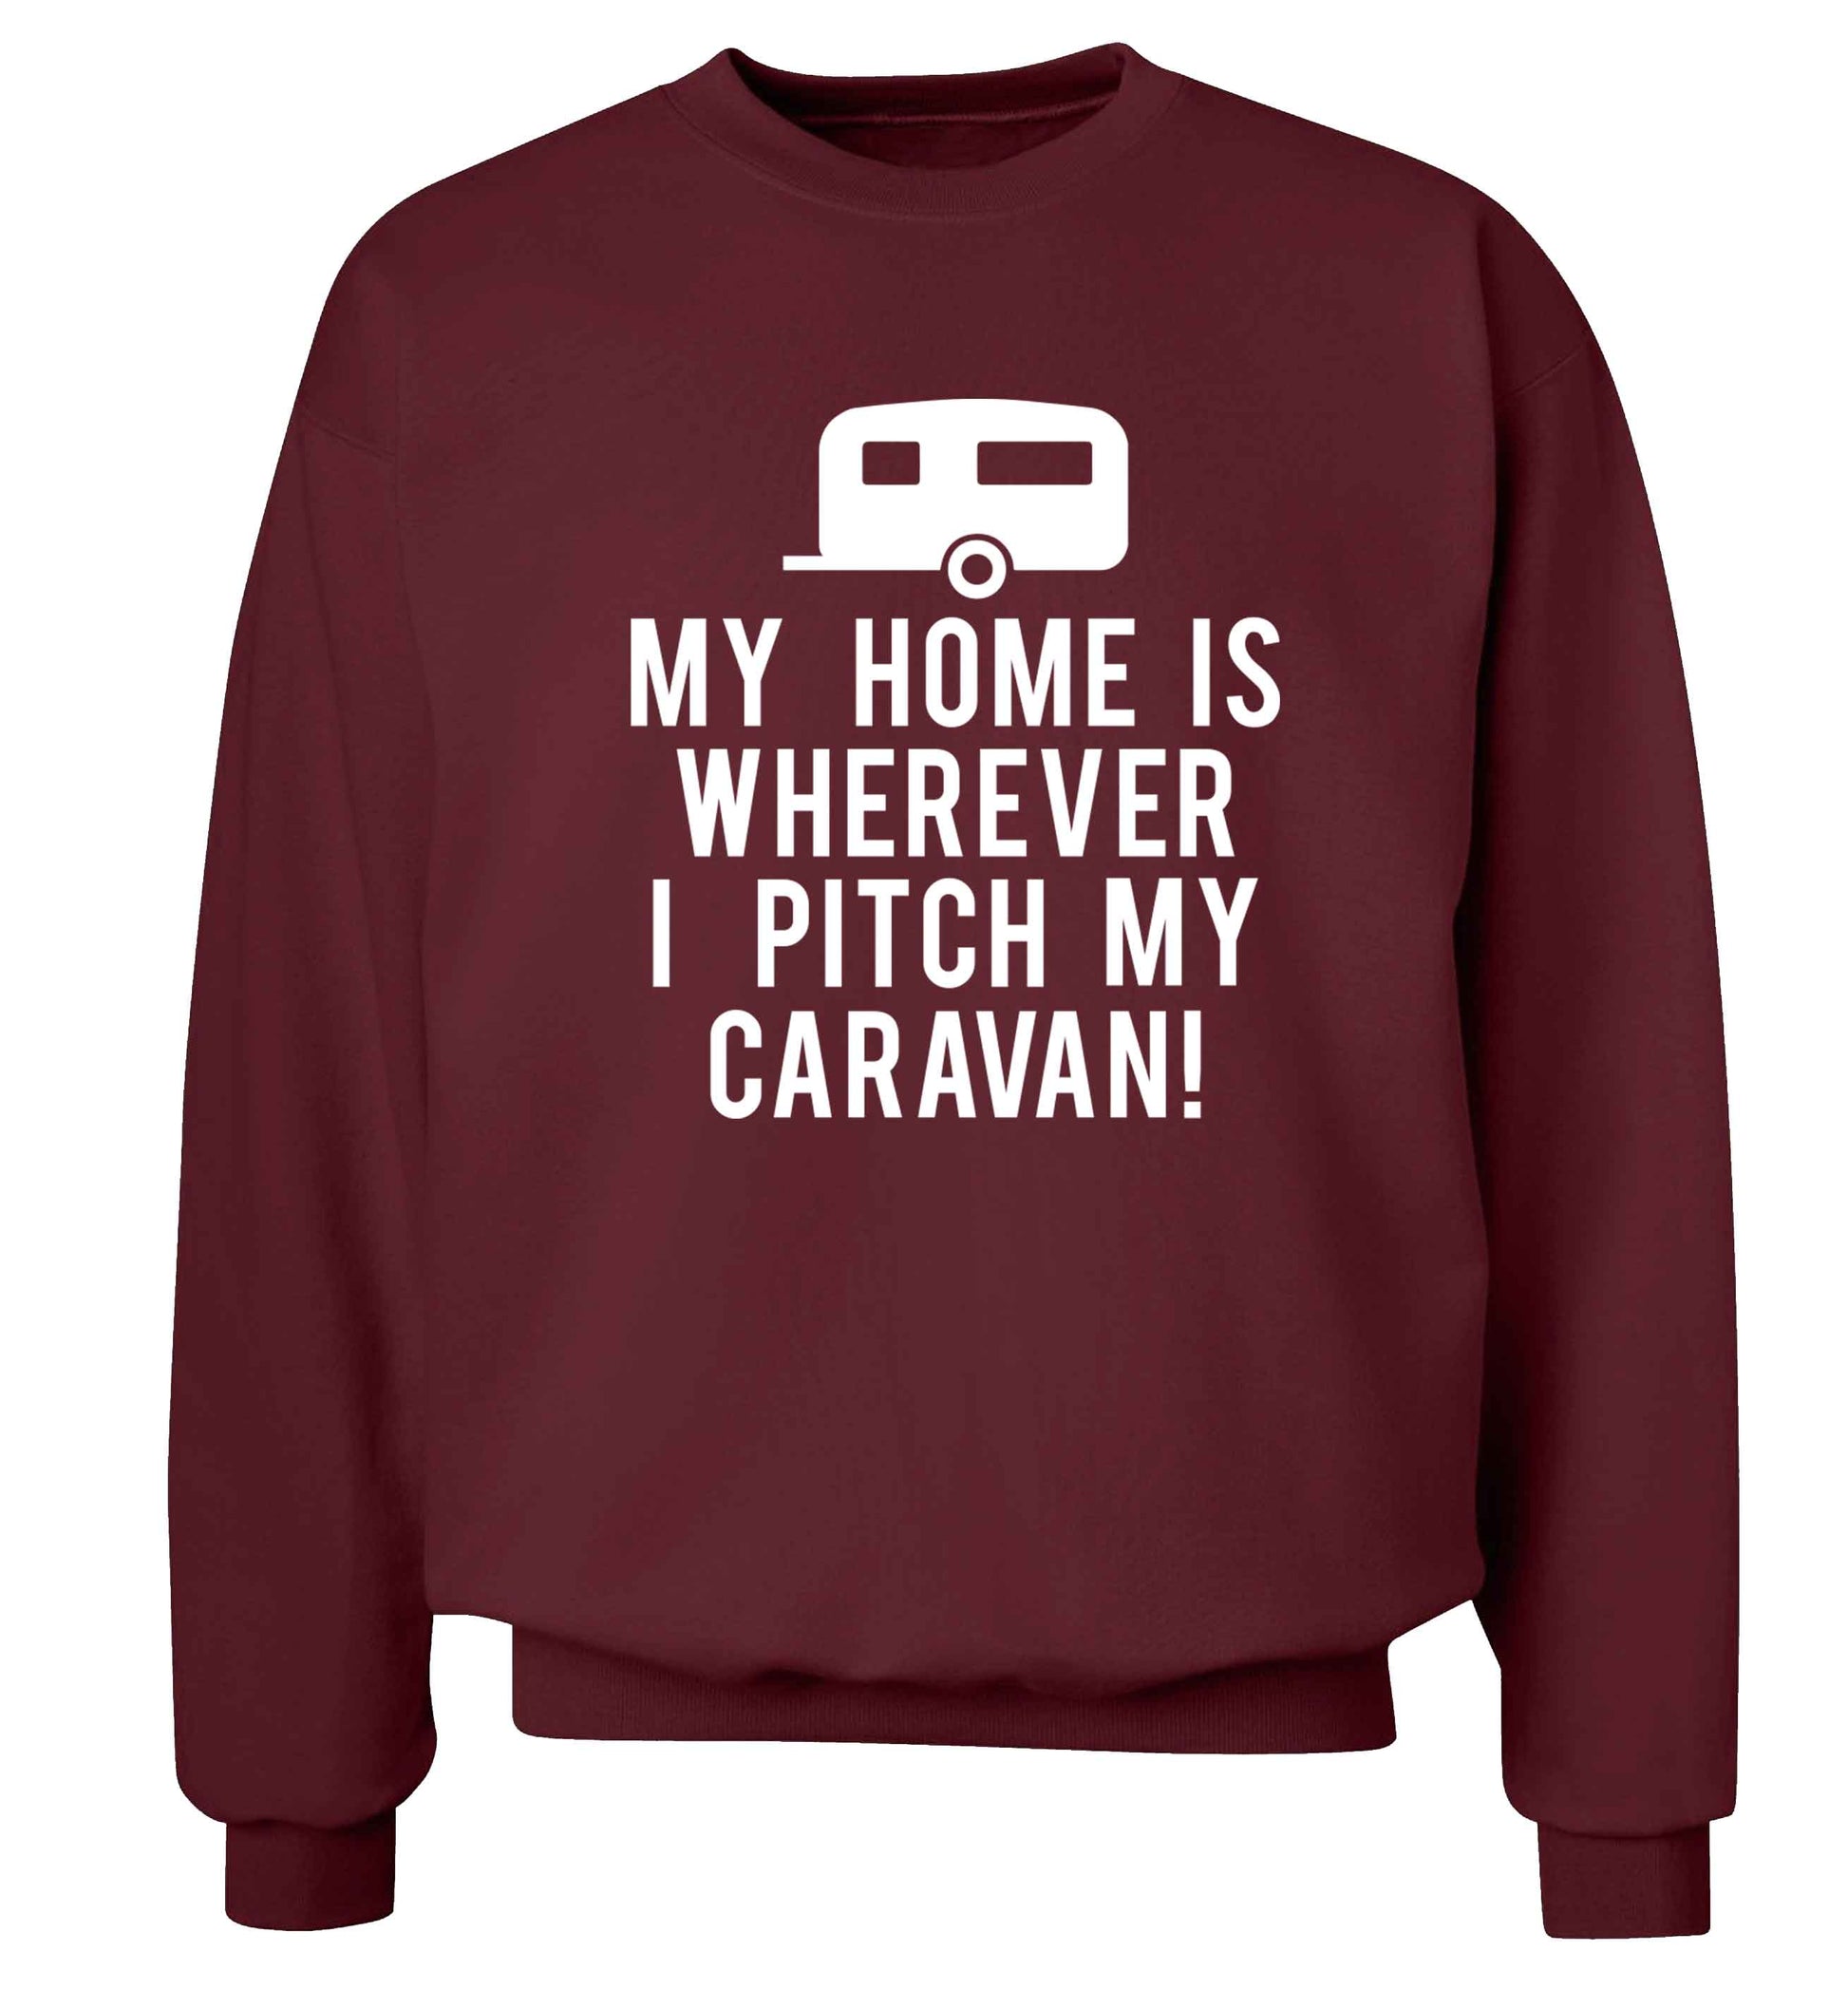 My home is wherever I pitch my caravan Adult's unisex maroon Sweater 2XL